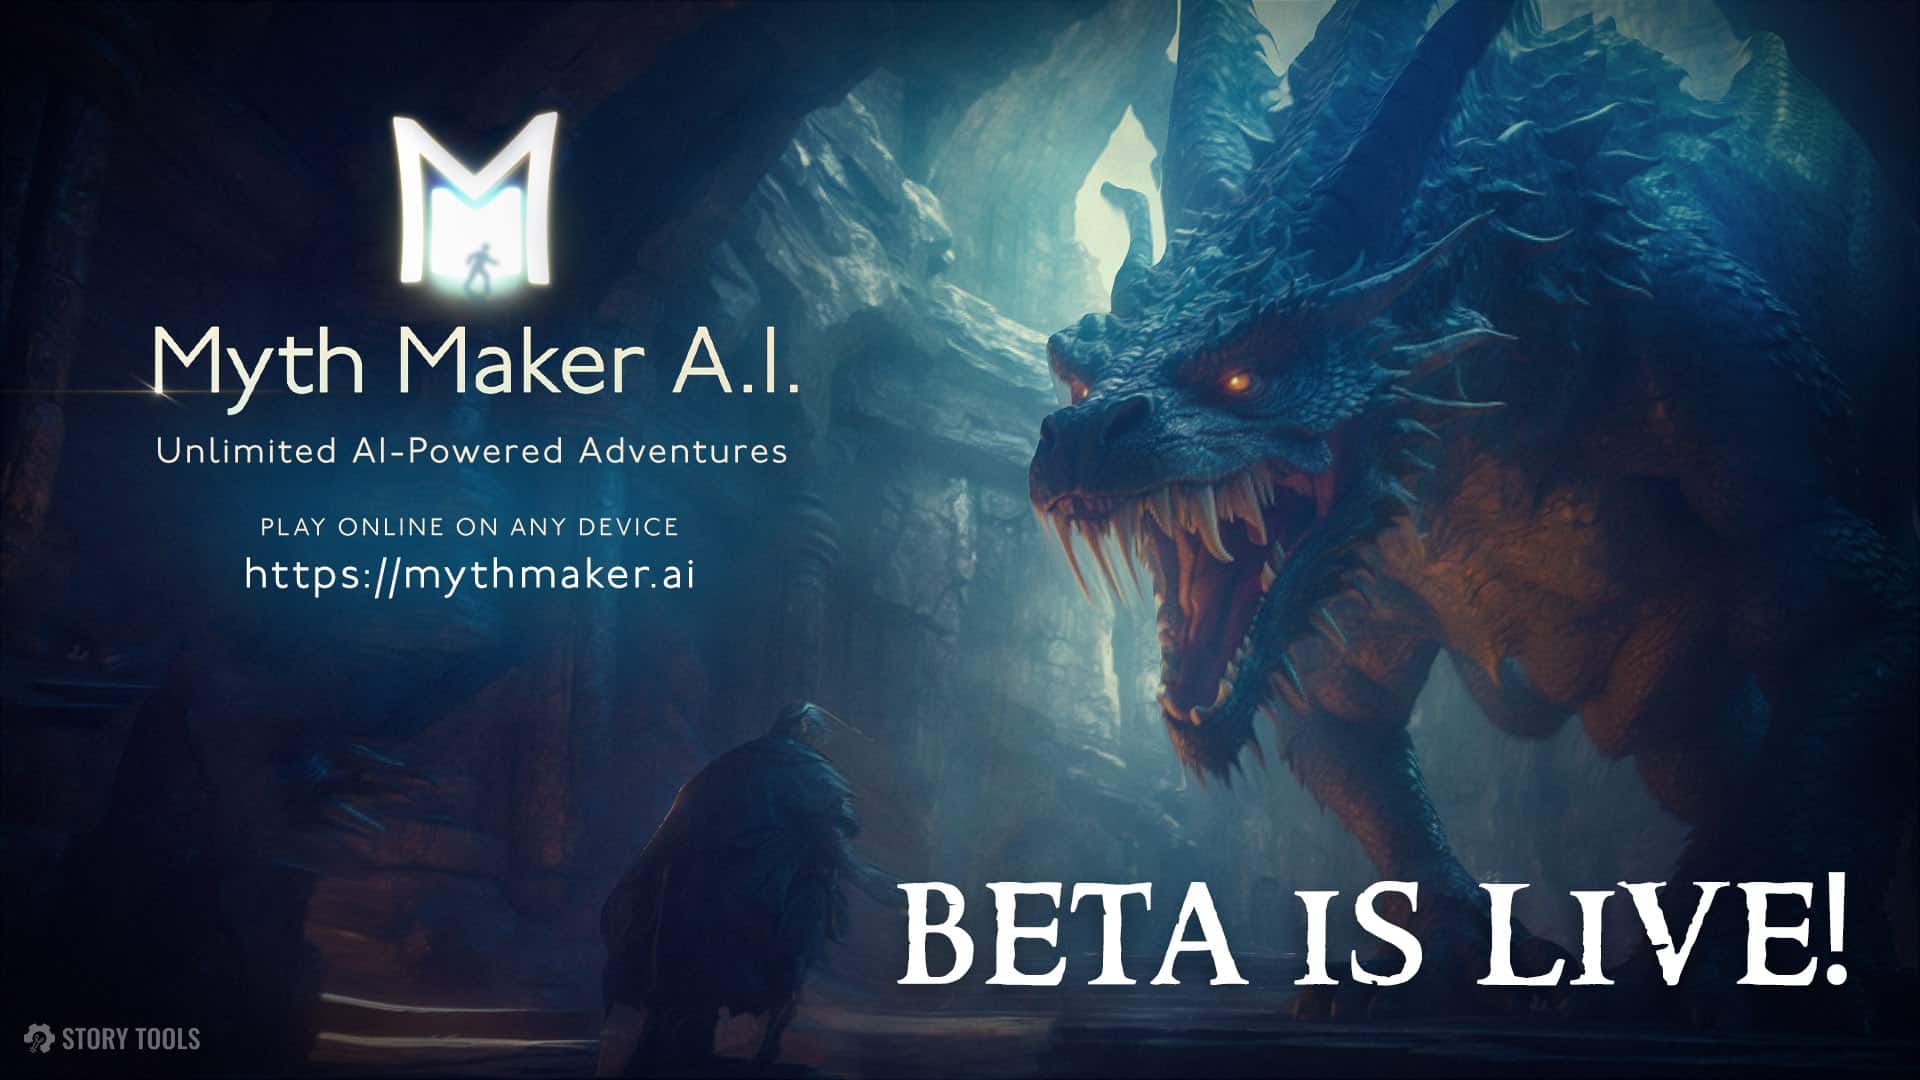 It is finally here: A True AI Gamemaster!